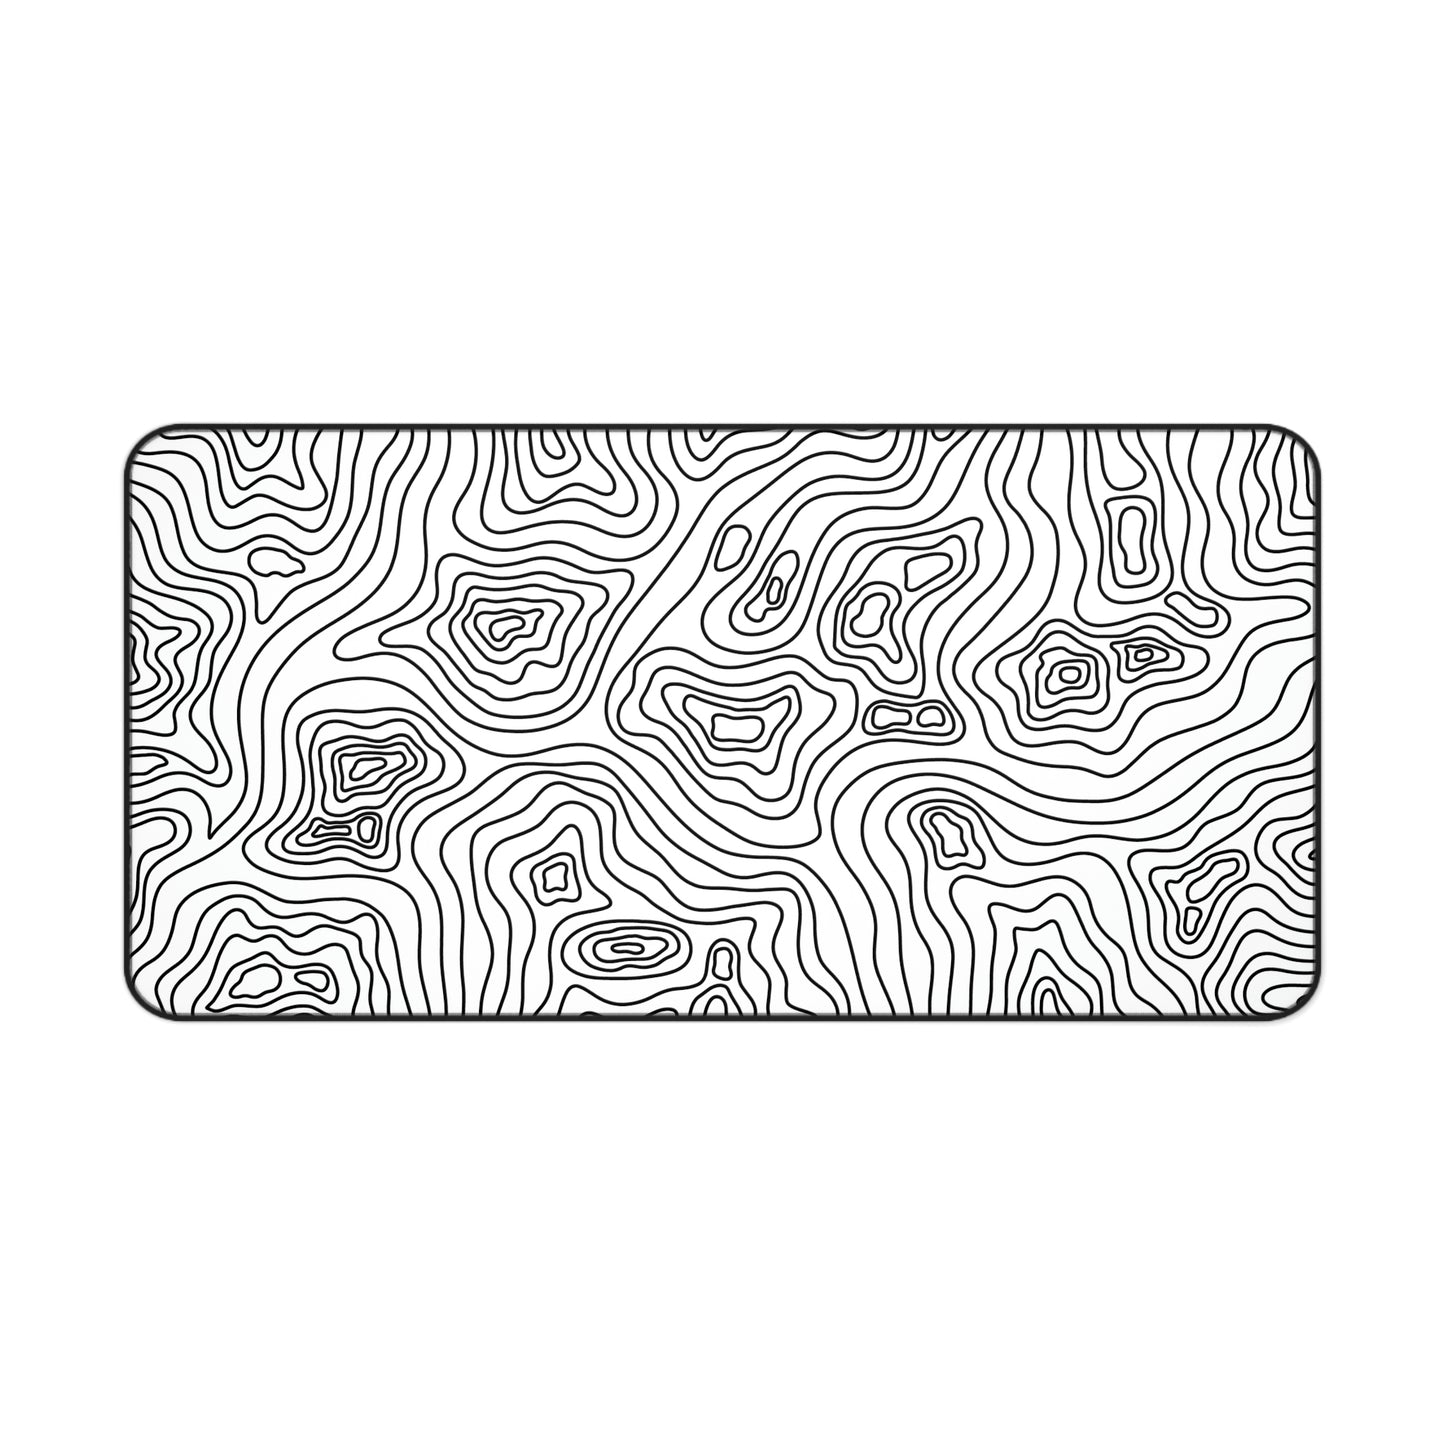 A 31" x 15.5" white topographic desk mat. The desk mat is white with black topographic lines.